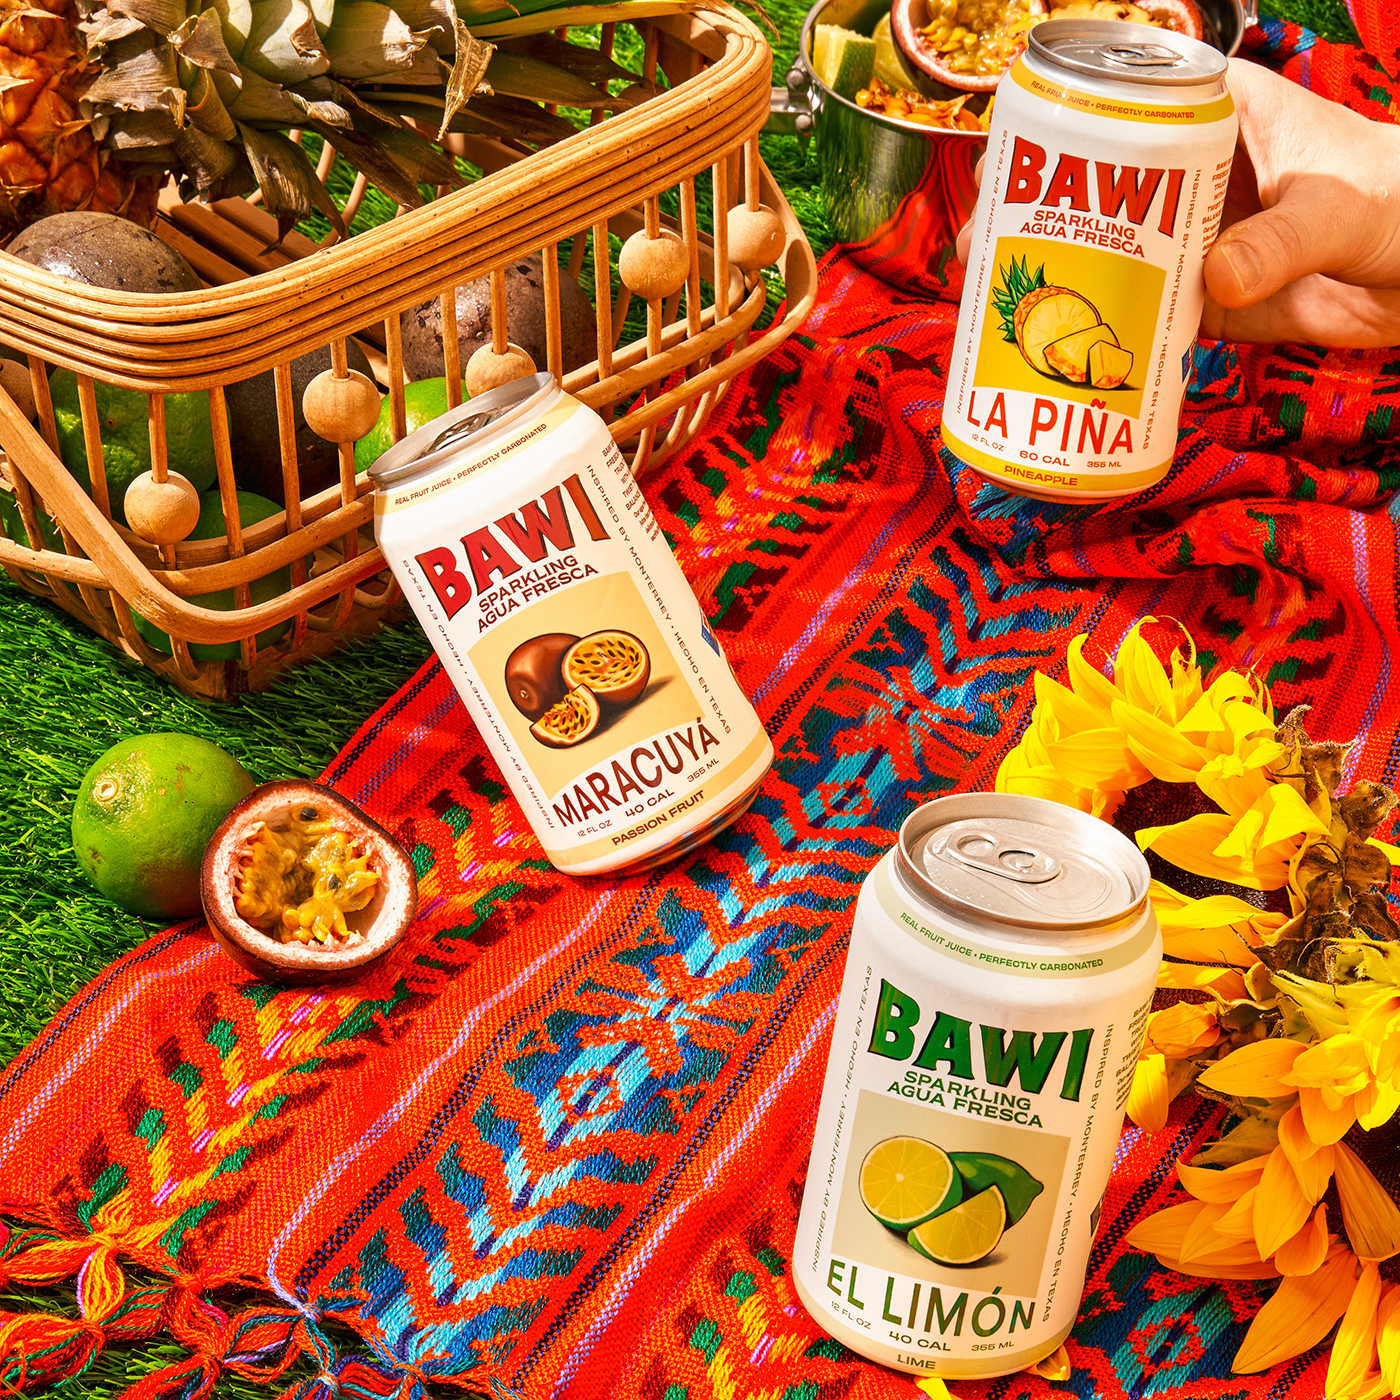 Bawi product lineup